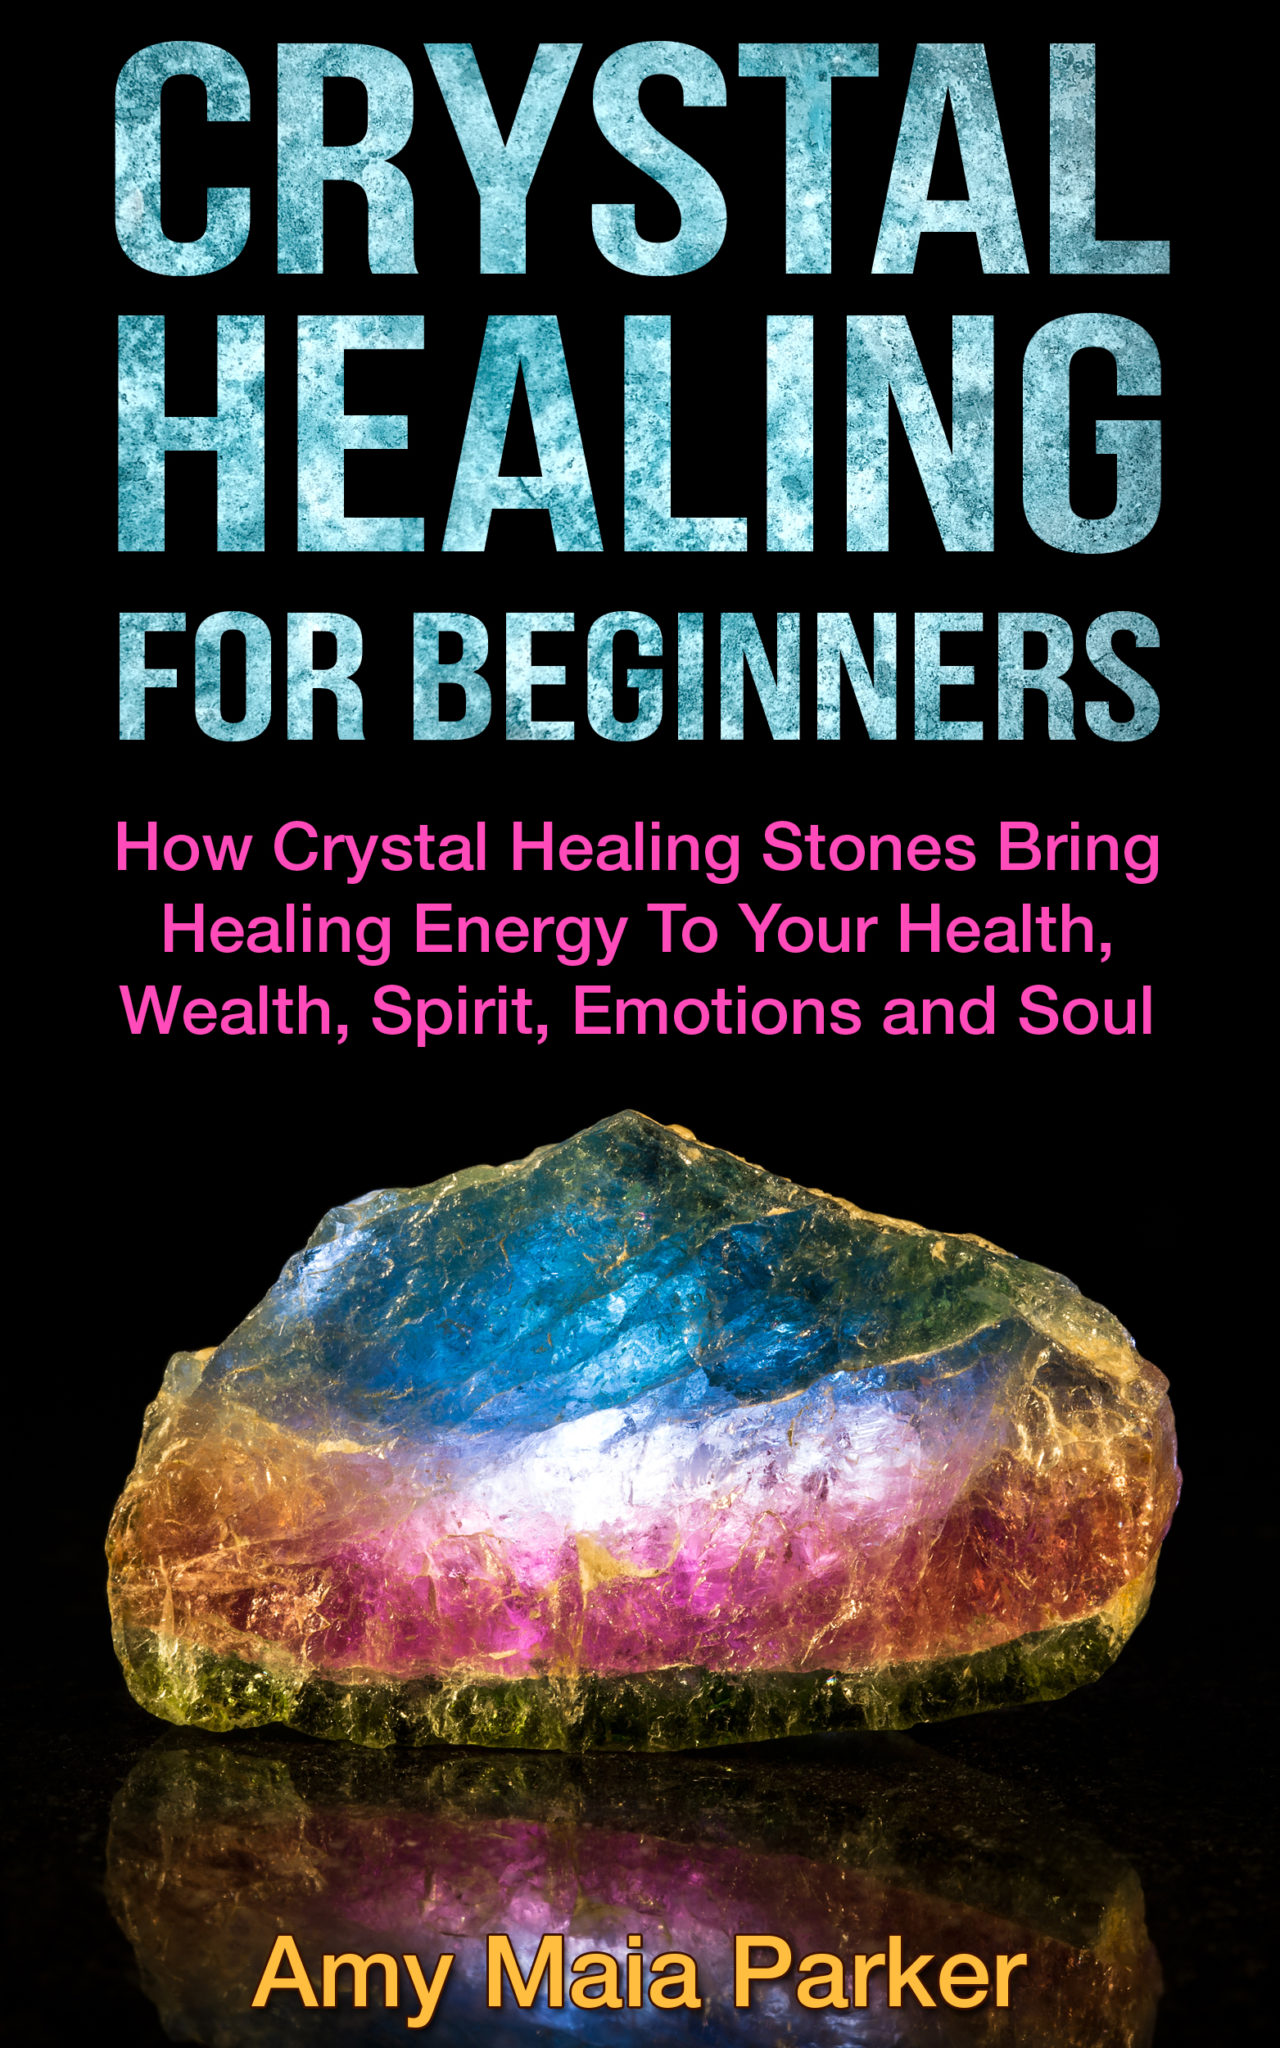 Crystal Healing For Beginners – How Crystal Healing Stones Bring Healing Energy To Your Health, Wealth, Spirit, Emotions and Soul by Amy Maia Parker